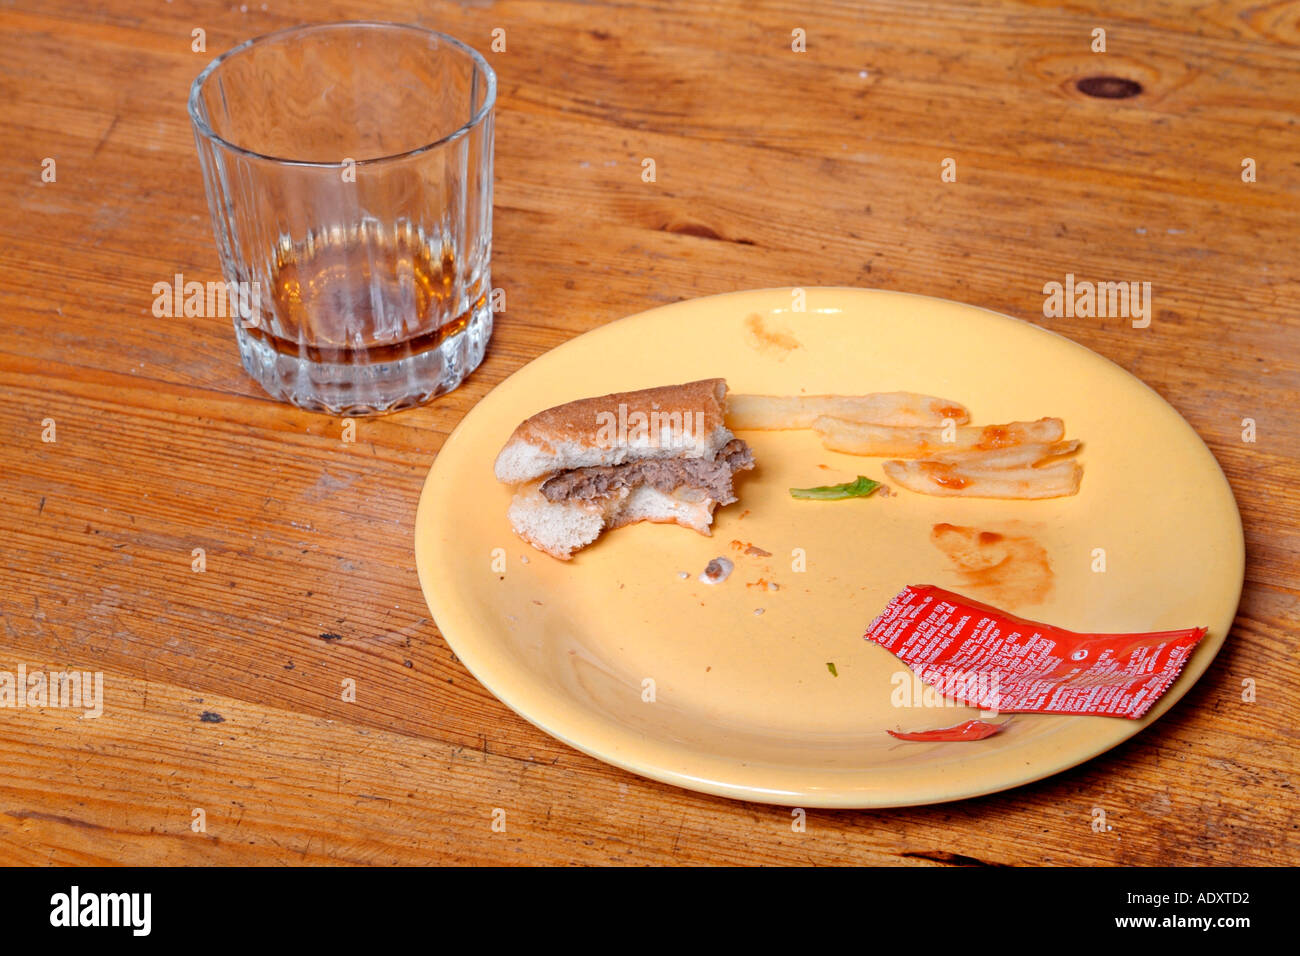 Leftovers from a fast-food burger meal. Stock Photo